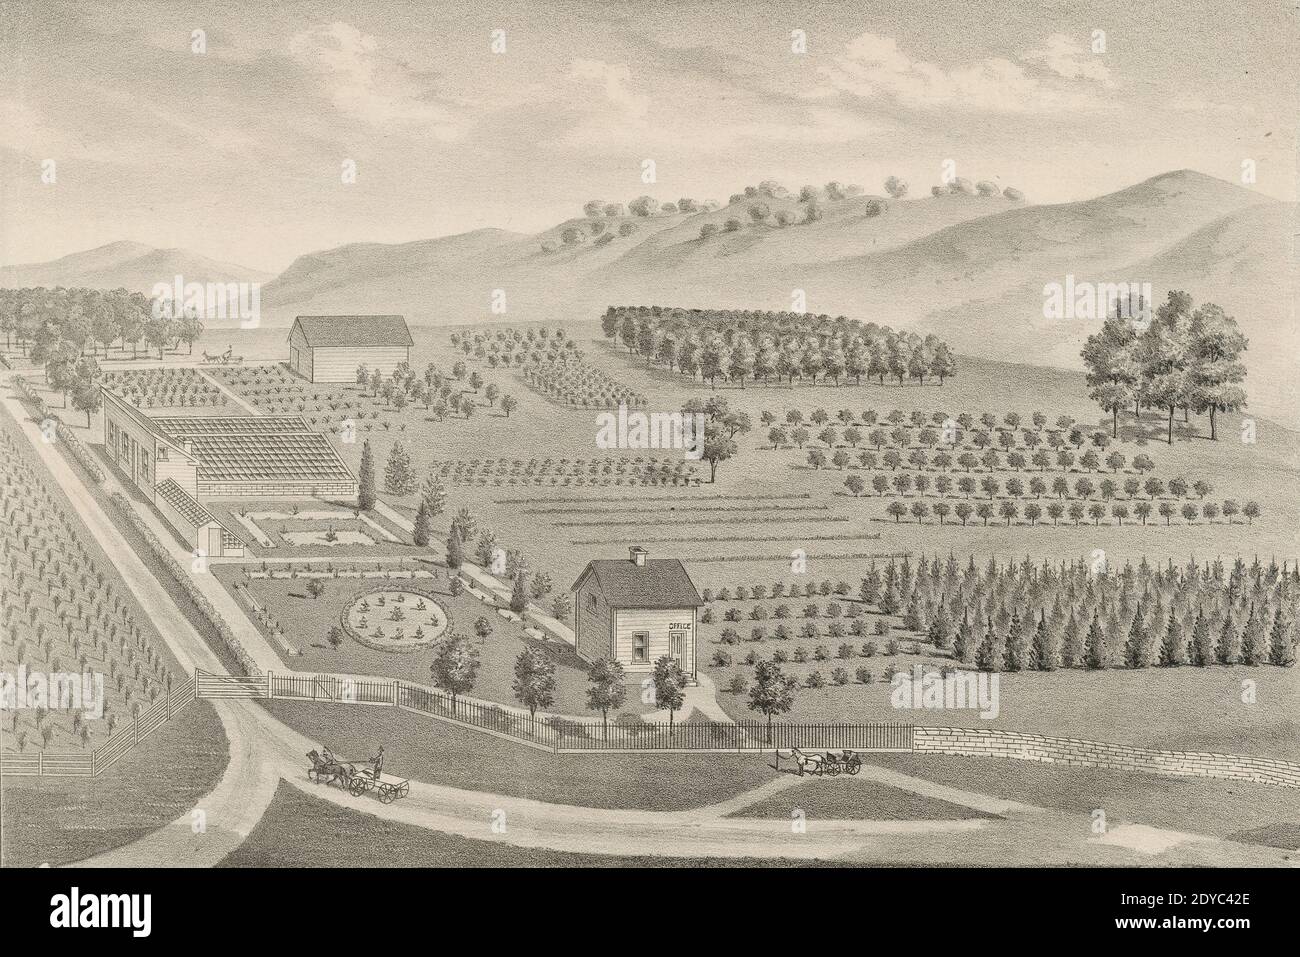 Antique 1875 engraving, Marietta Nurseries, and Green Houses of Engle and Brothers, Proprietors in Marietta borough, Lancaster County, Pennsylvania. SOURCE: ORIGINAL ENGRAVING Stock Photo